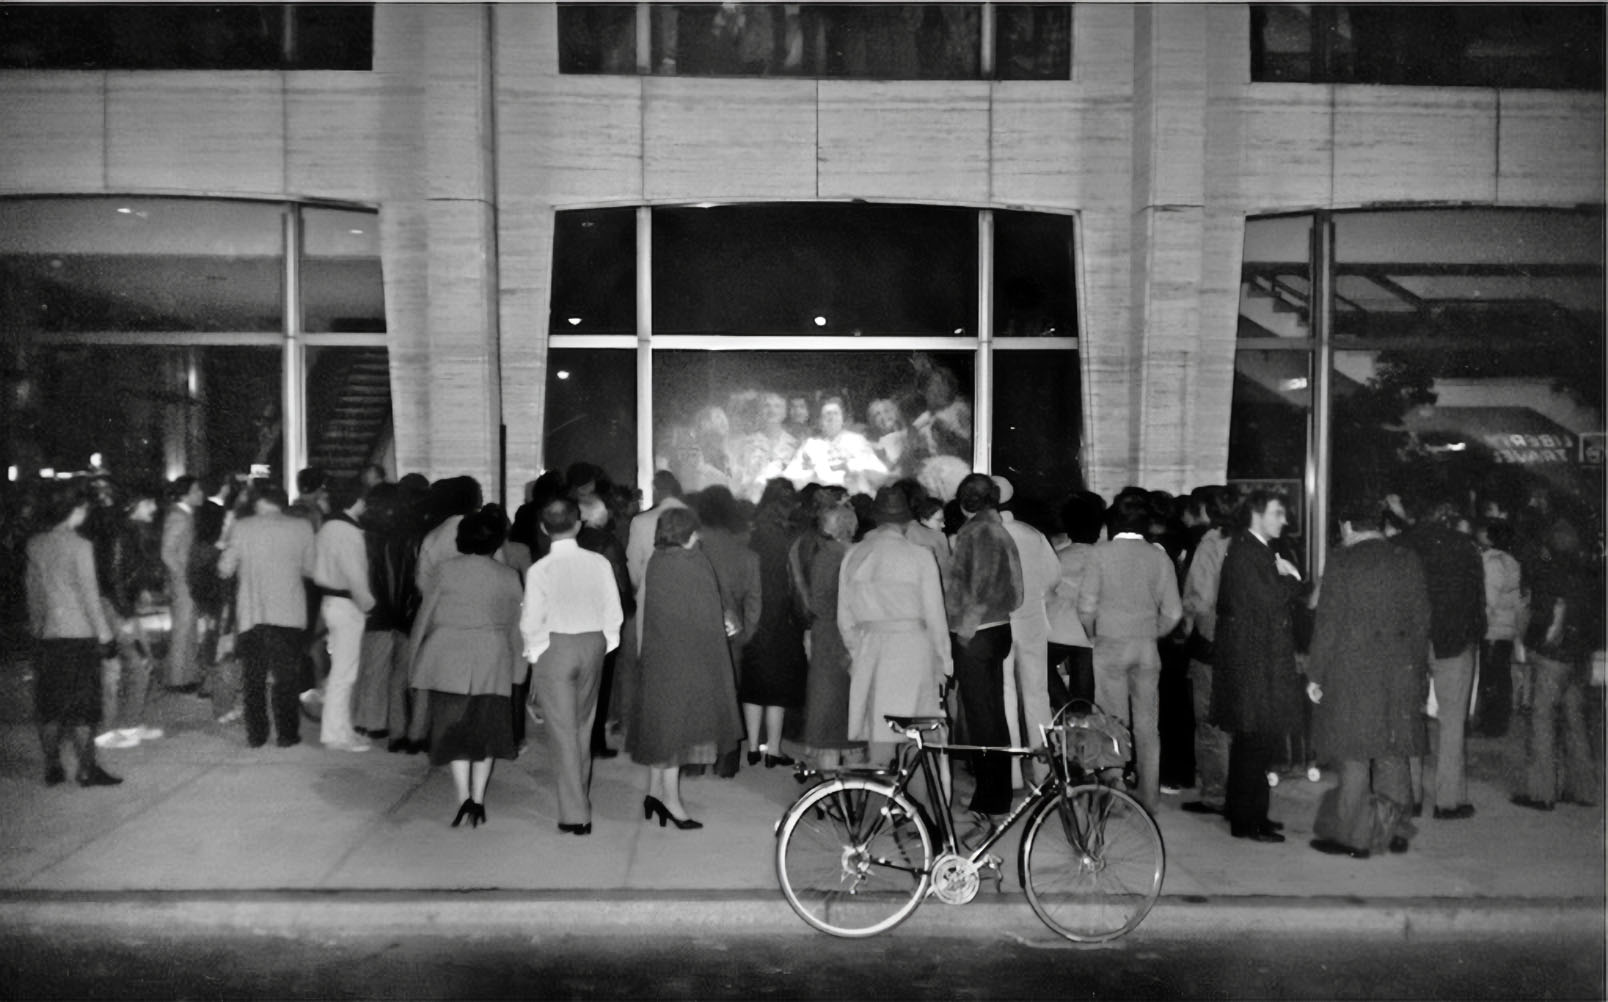 A black and white photograph depicts a large crowd of individuals gathered outside a building during nighttime, engrossed in a large illuminated window display. Inside the window, a projection shows multiple faces, a representation of the groundbreaking "Hole-in-Space" art installation. The onlookers, display a sense of wonder and curiosity. A solitary bicycle is parked in the foreground, adding depth to the scene. The image captures a pivotal moment in media art history, reflecting the intersection of technology, art, and human connection.